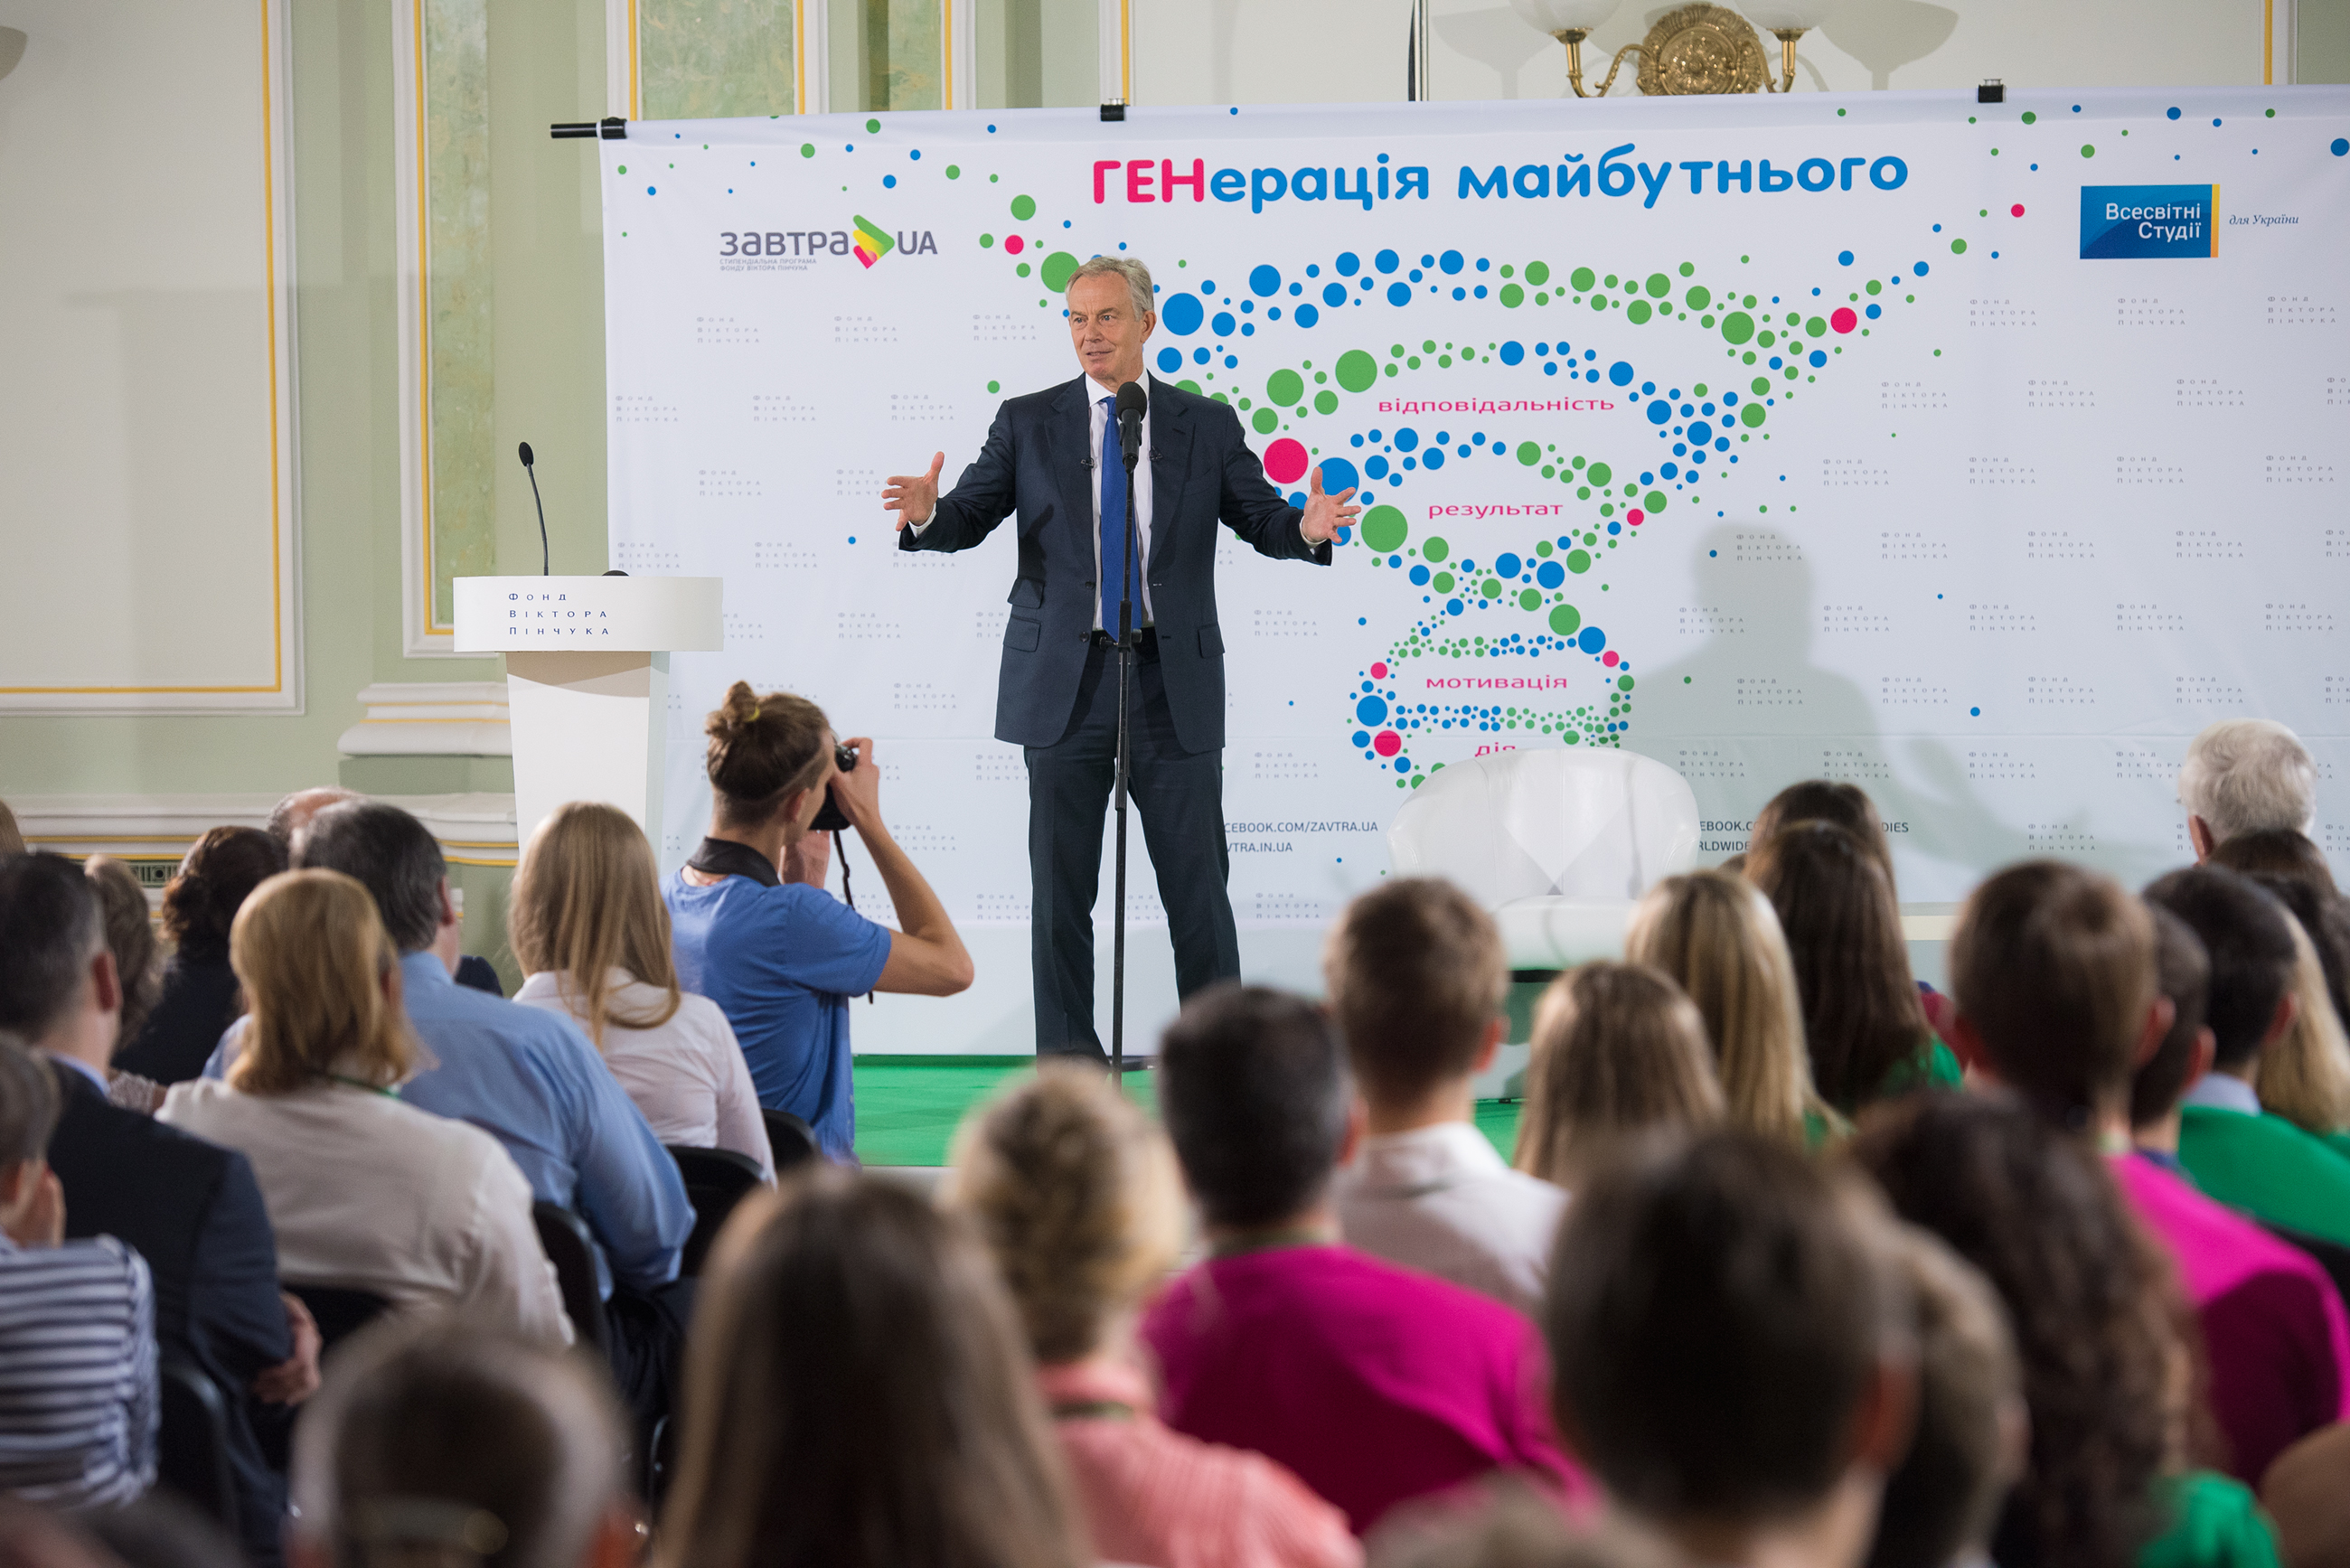 8th Annual Youth Forum of educational programs Zavtra.UA and WorldWideStudies